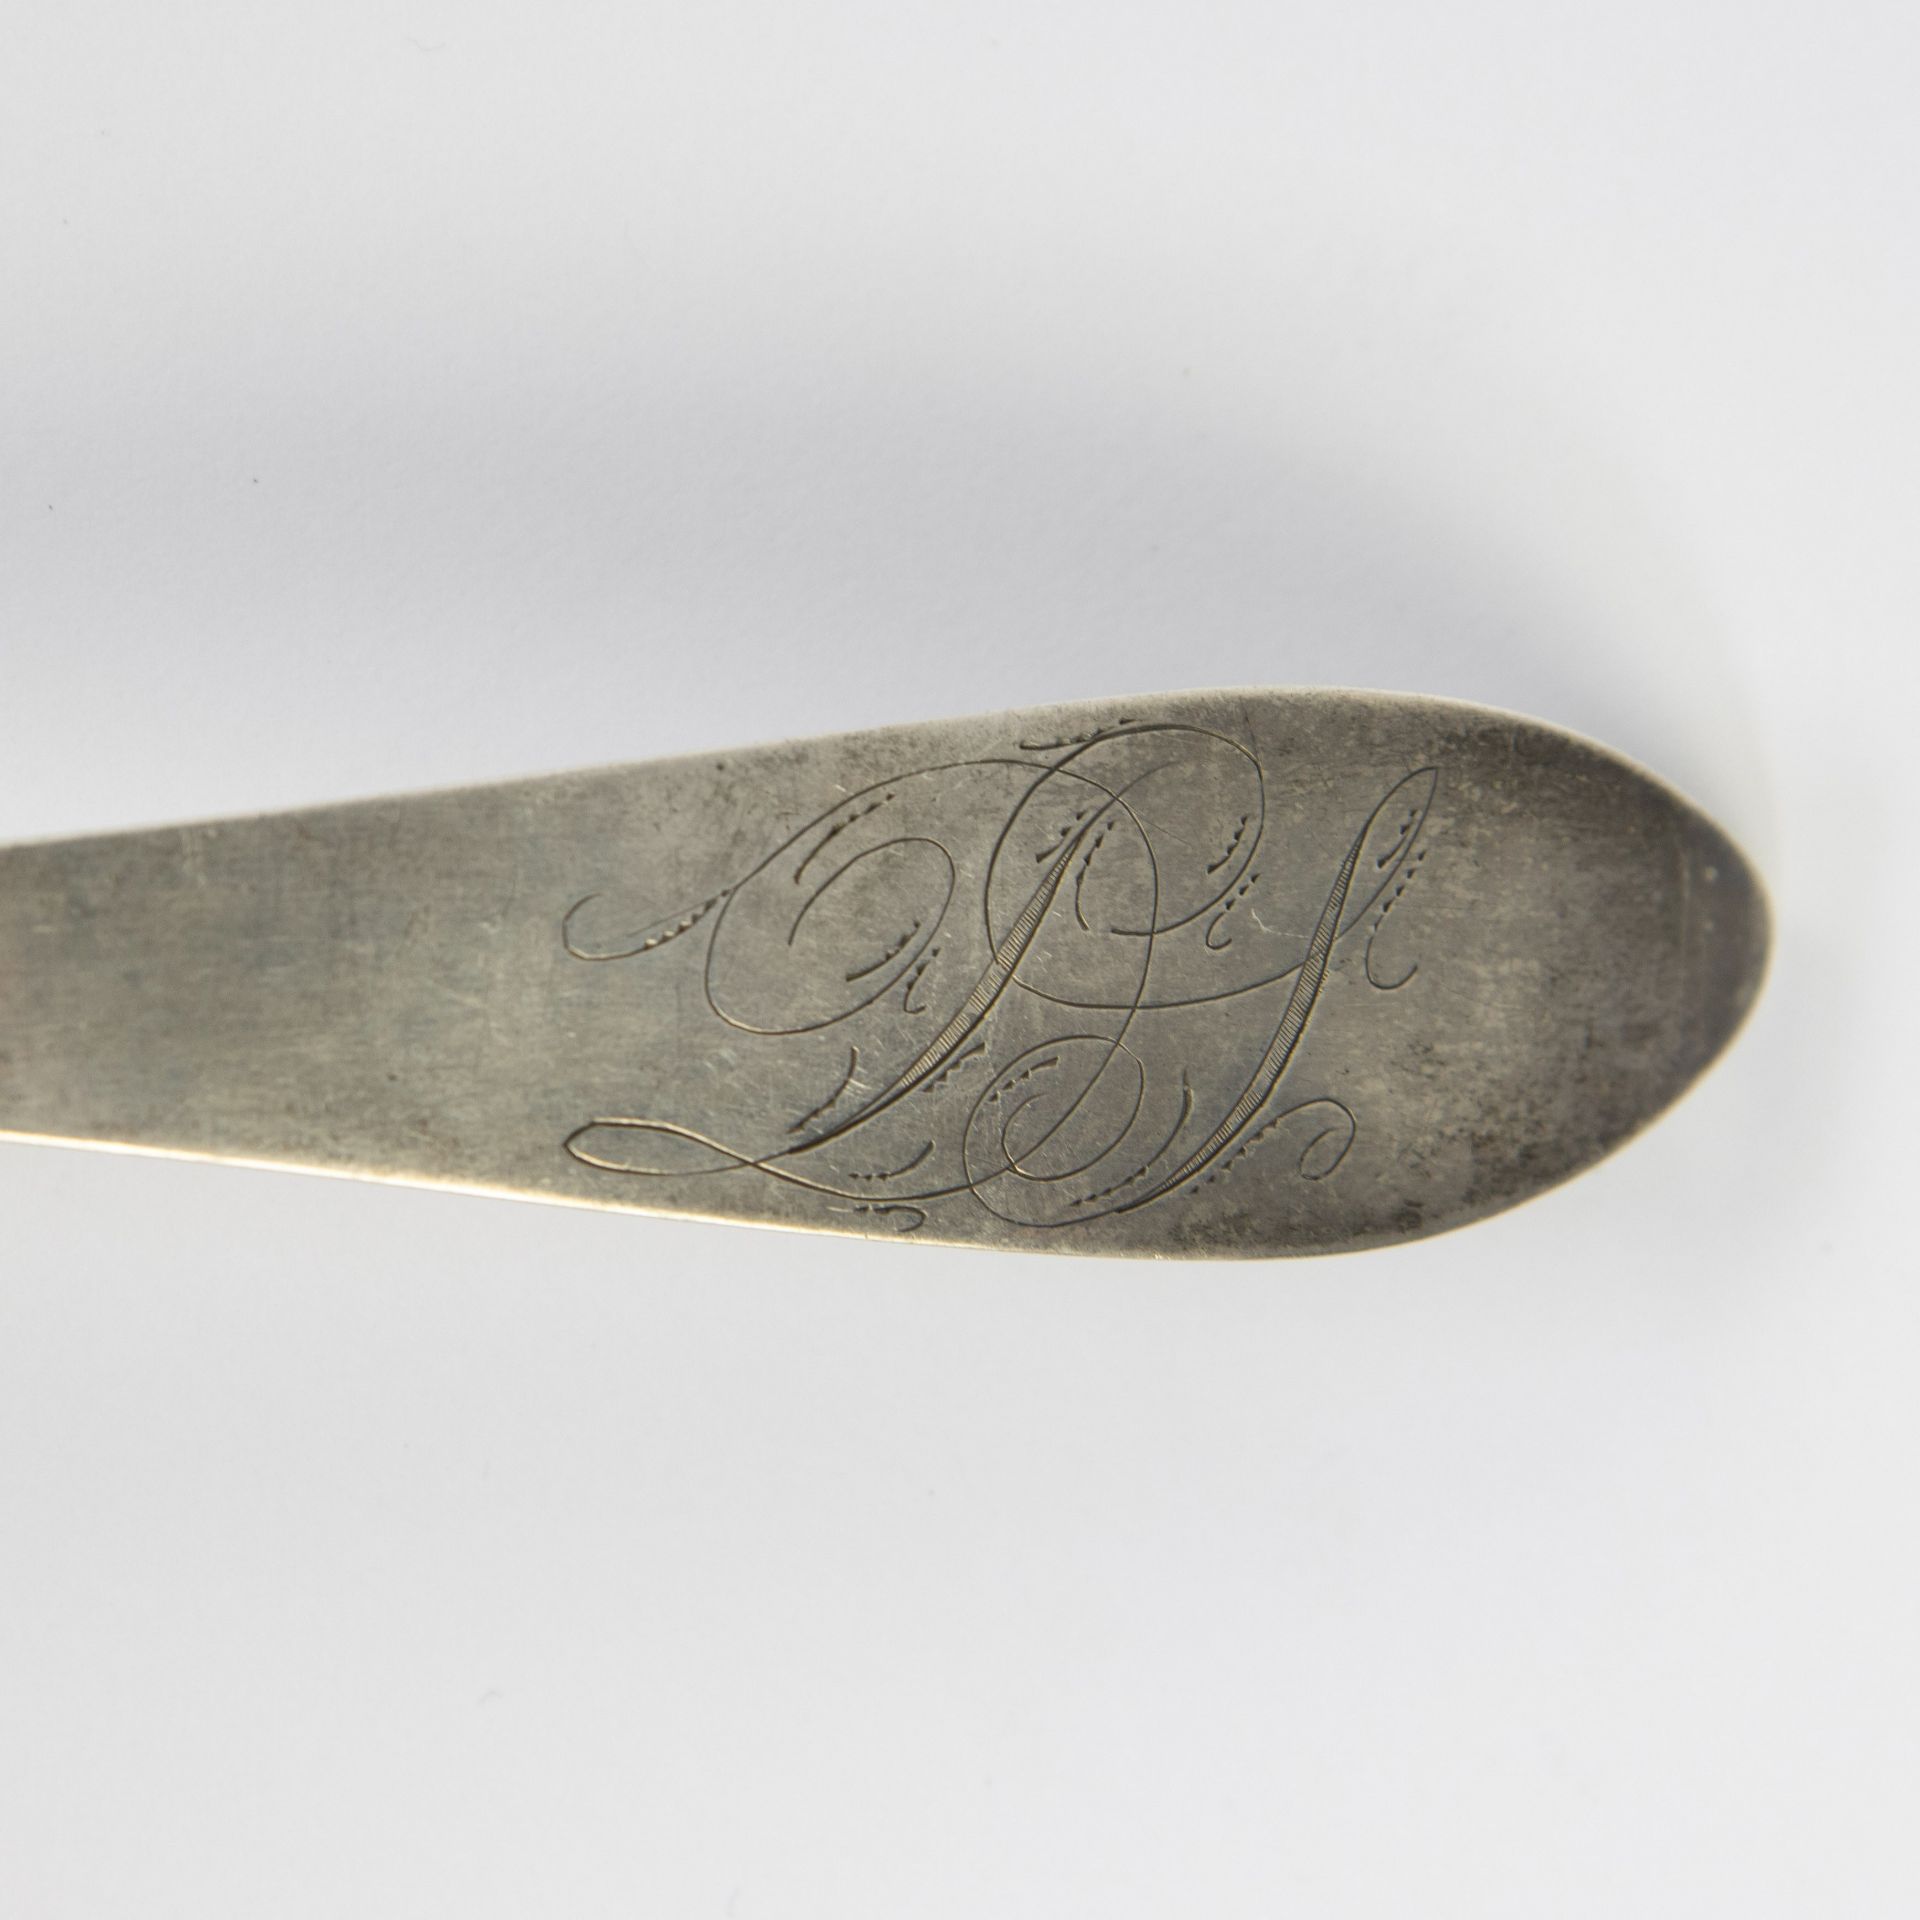 Silver soup spoon, Ghent 1790, Pieter Collé - Image 4 of 5